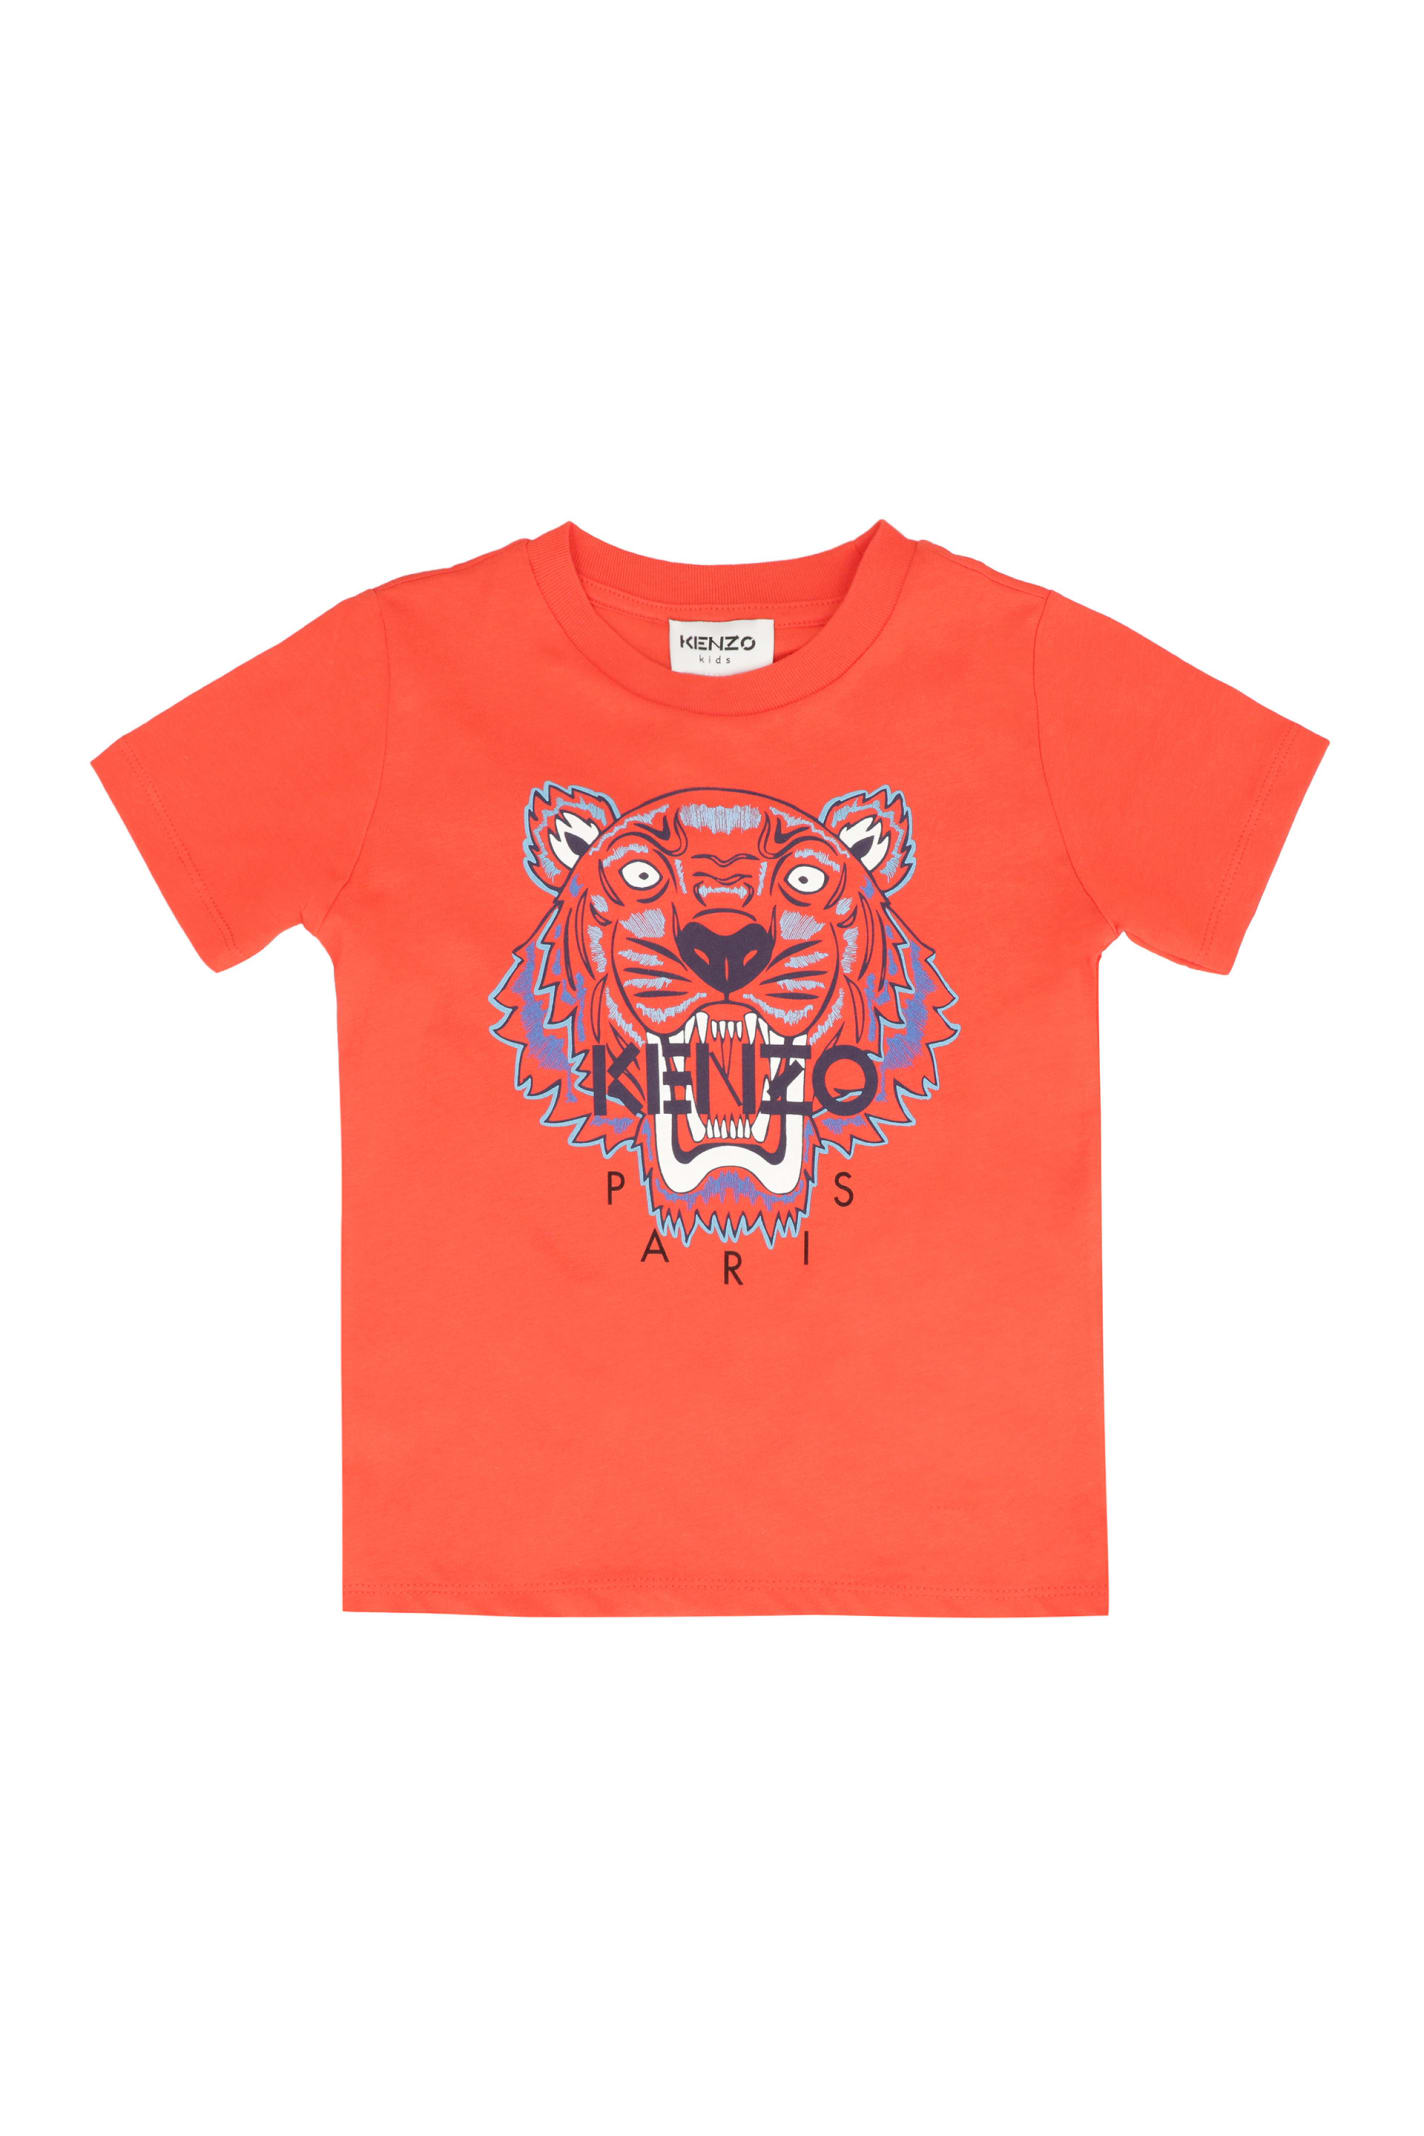 Kenzo Kids' Printed Cotton T-shirt In Red